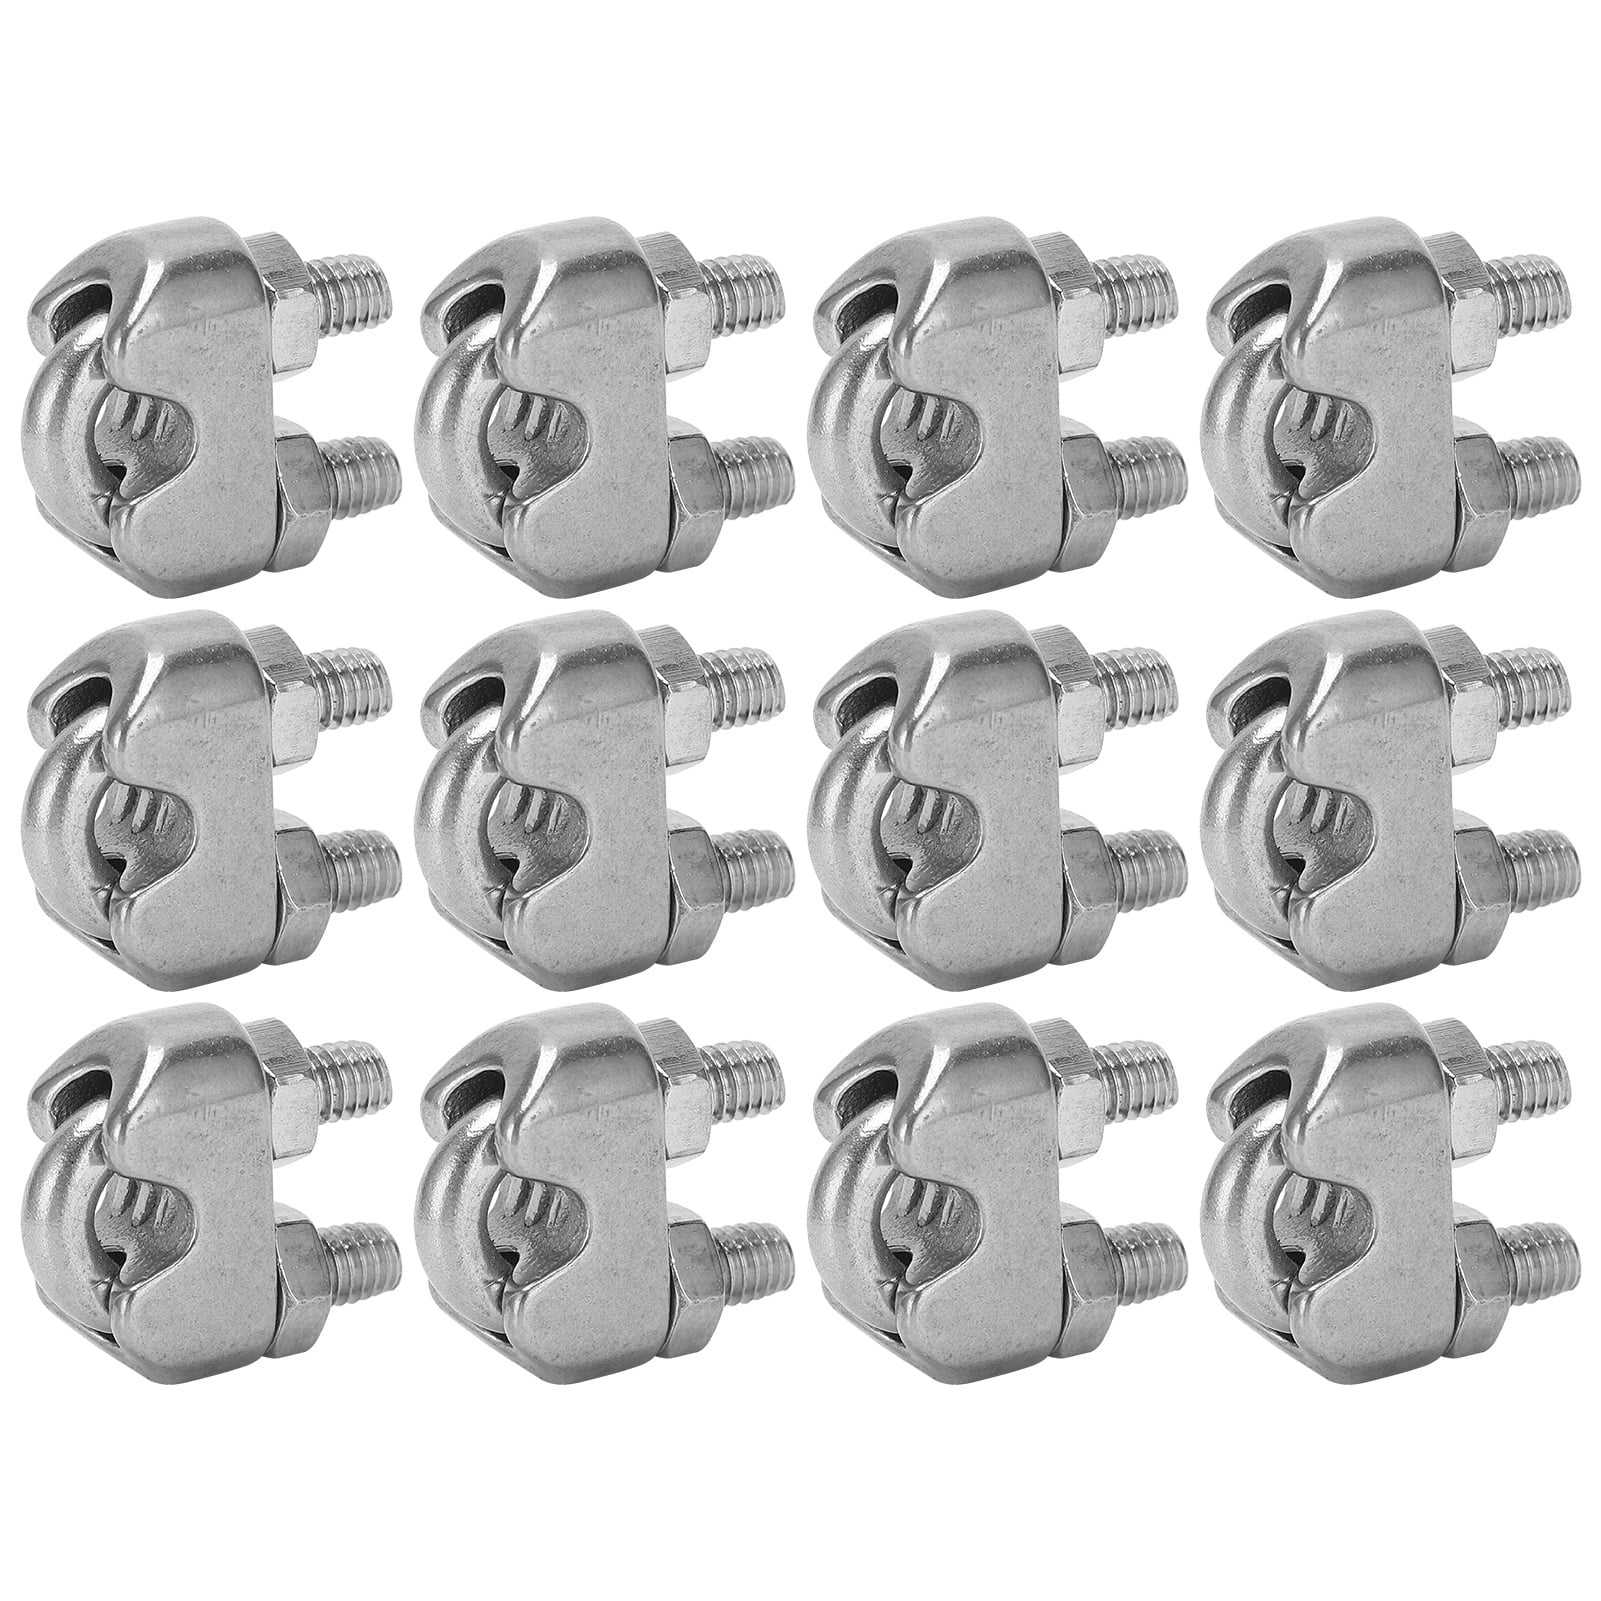 20mm Dia Wall Mounted Aluminium Alloy Pipe Clip Clamp Fastener 5pcs for sale online 